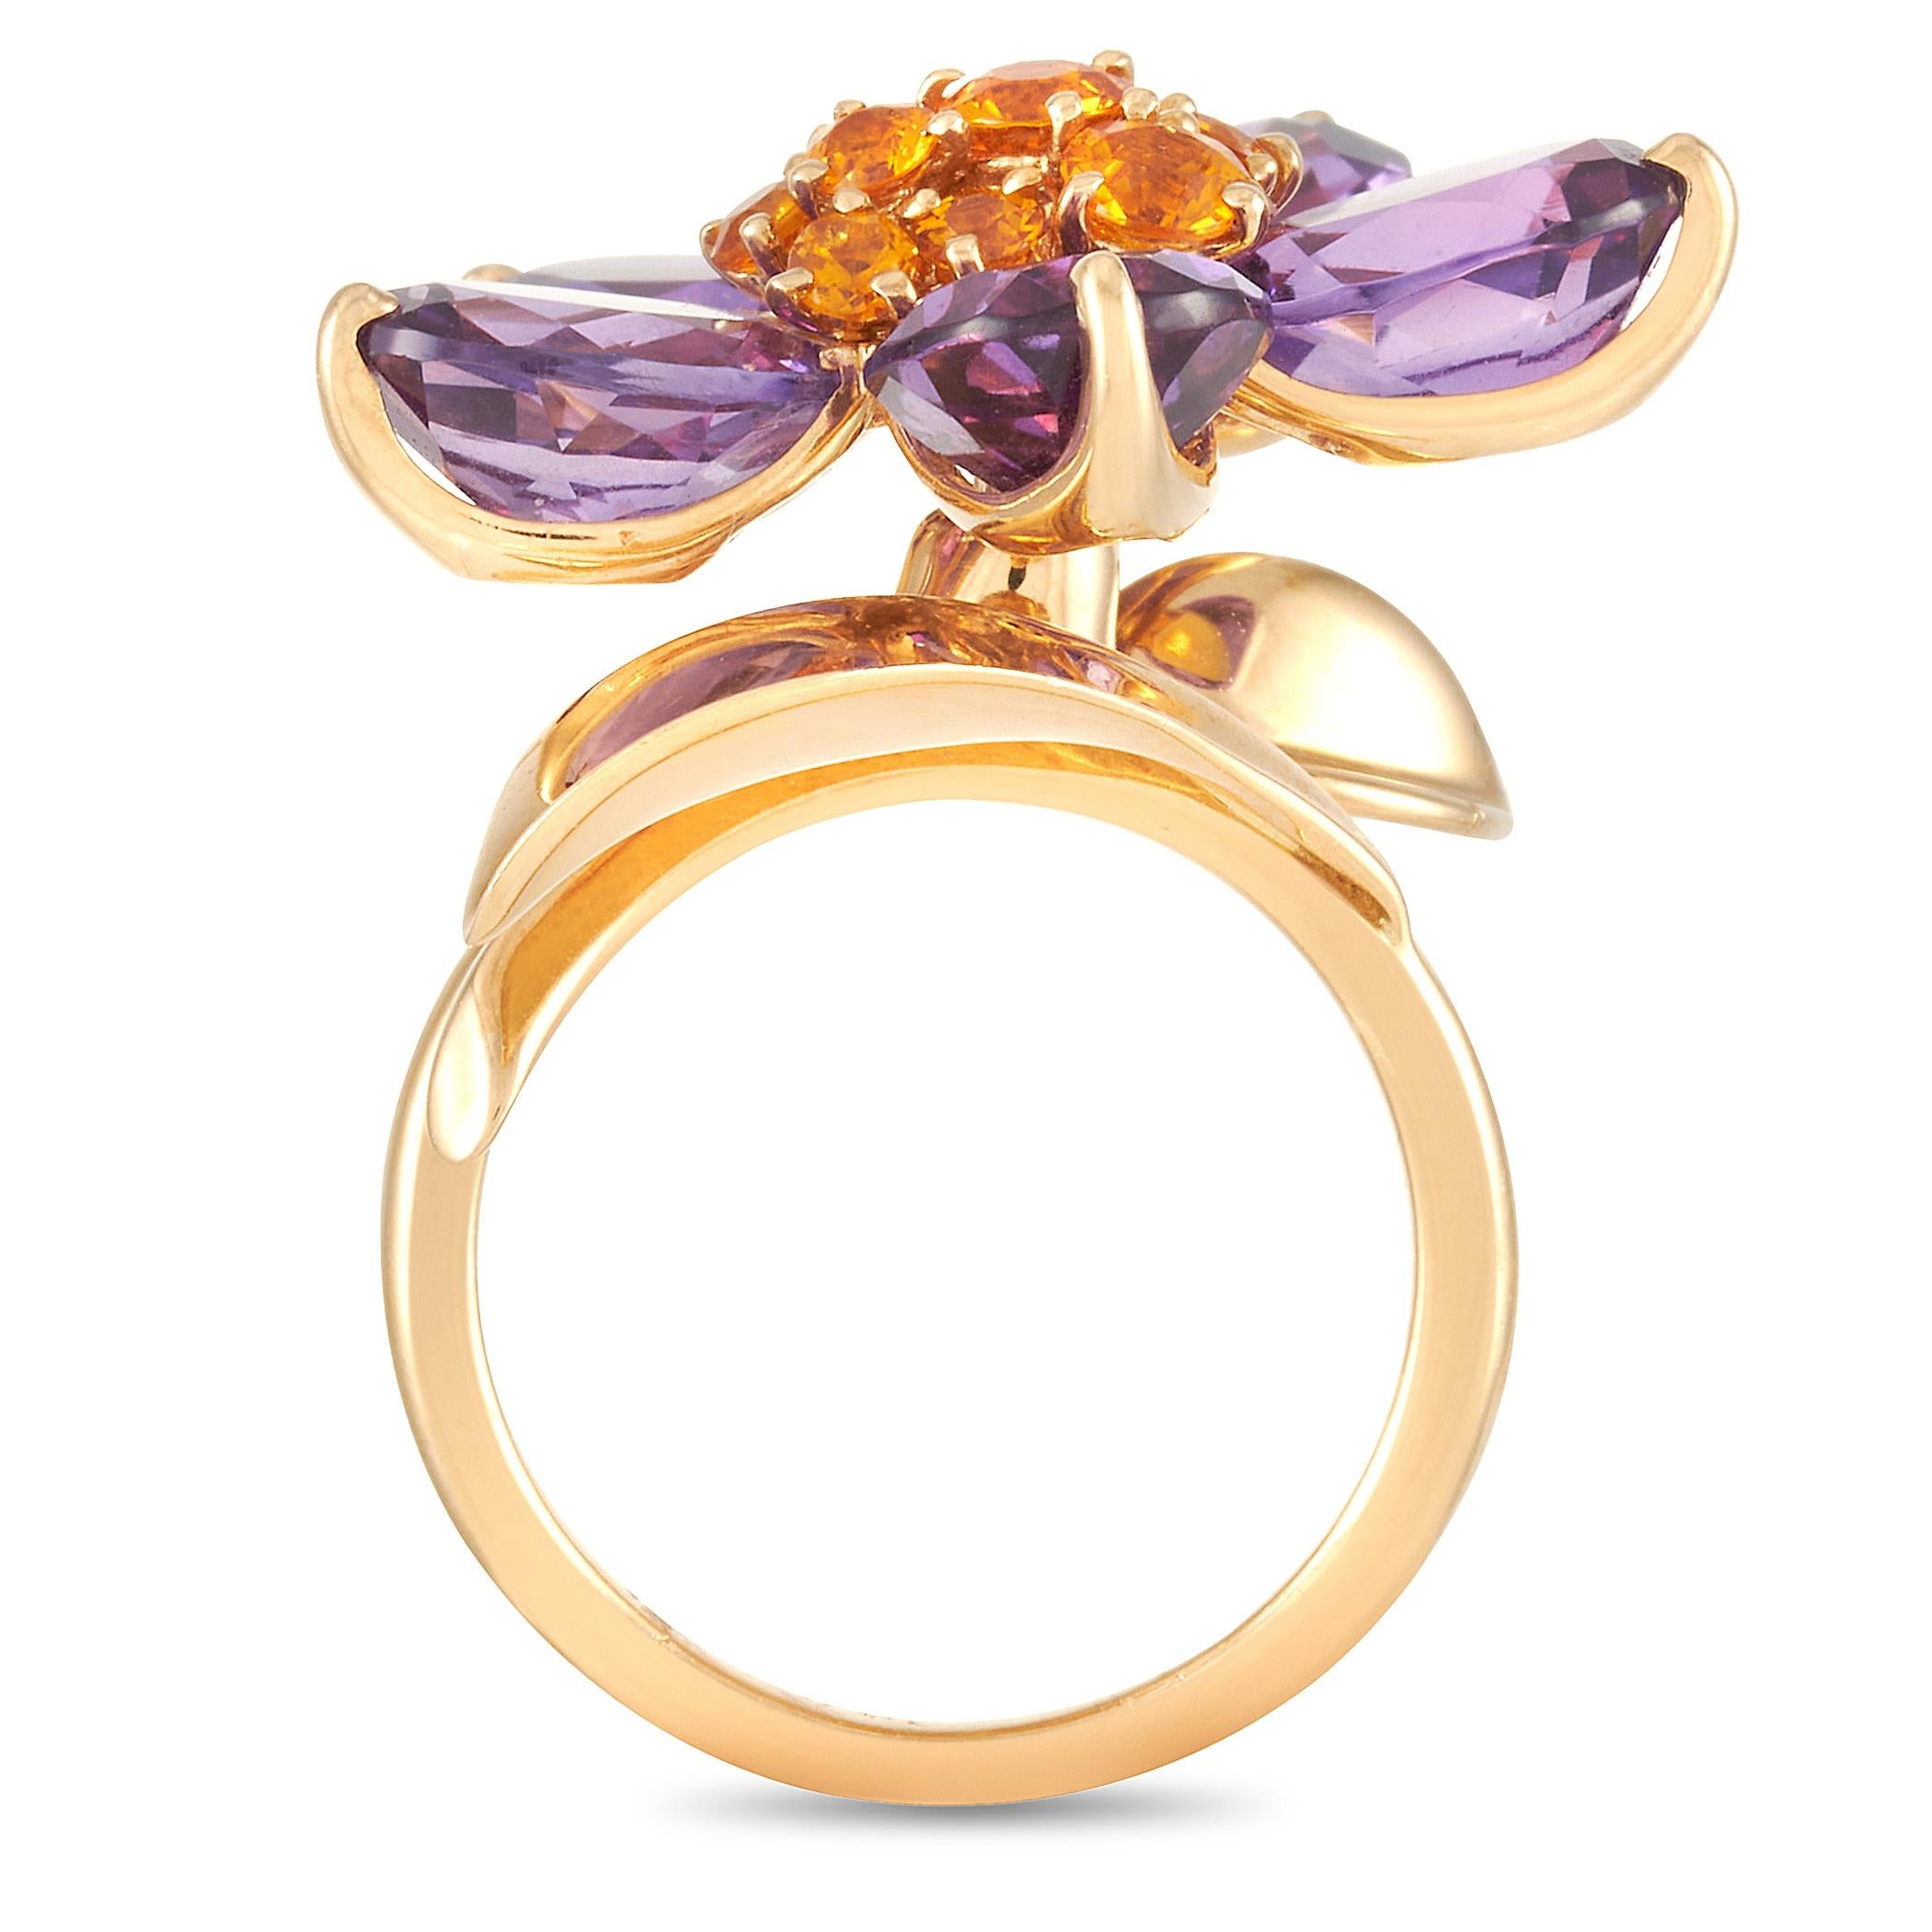 This Van Cleef & Arpels Hawaii 18K Yellow Gold Amethyst and Citrine Flower Ring is a showstopping piece made with an 18K yellow gold band and set with a cluster of citrines surrounded by five beautiful amethysts forming a lovely gemstone bloom. The